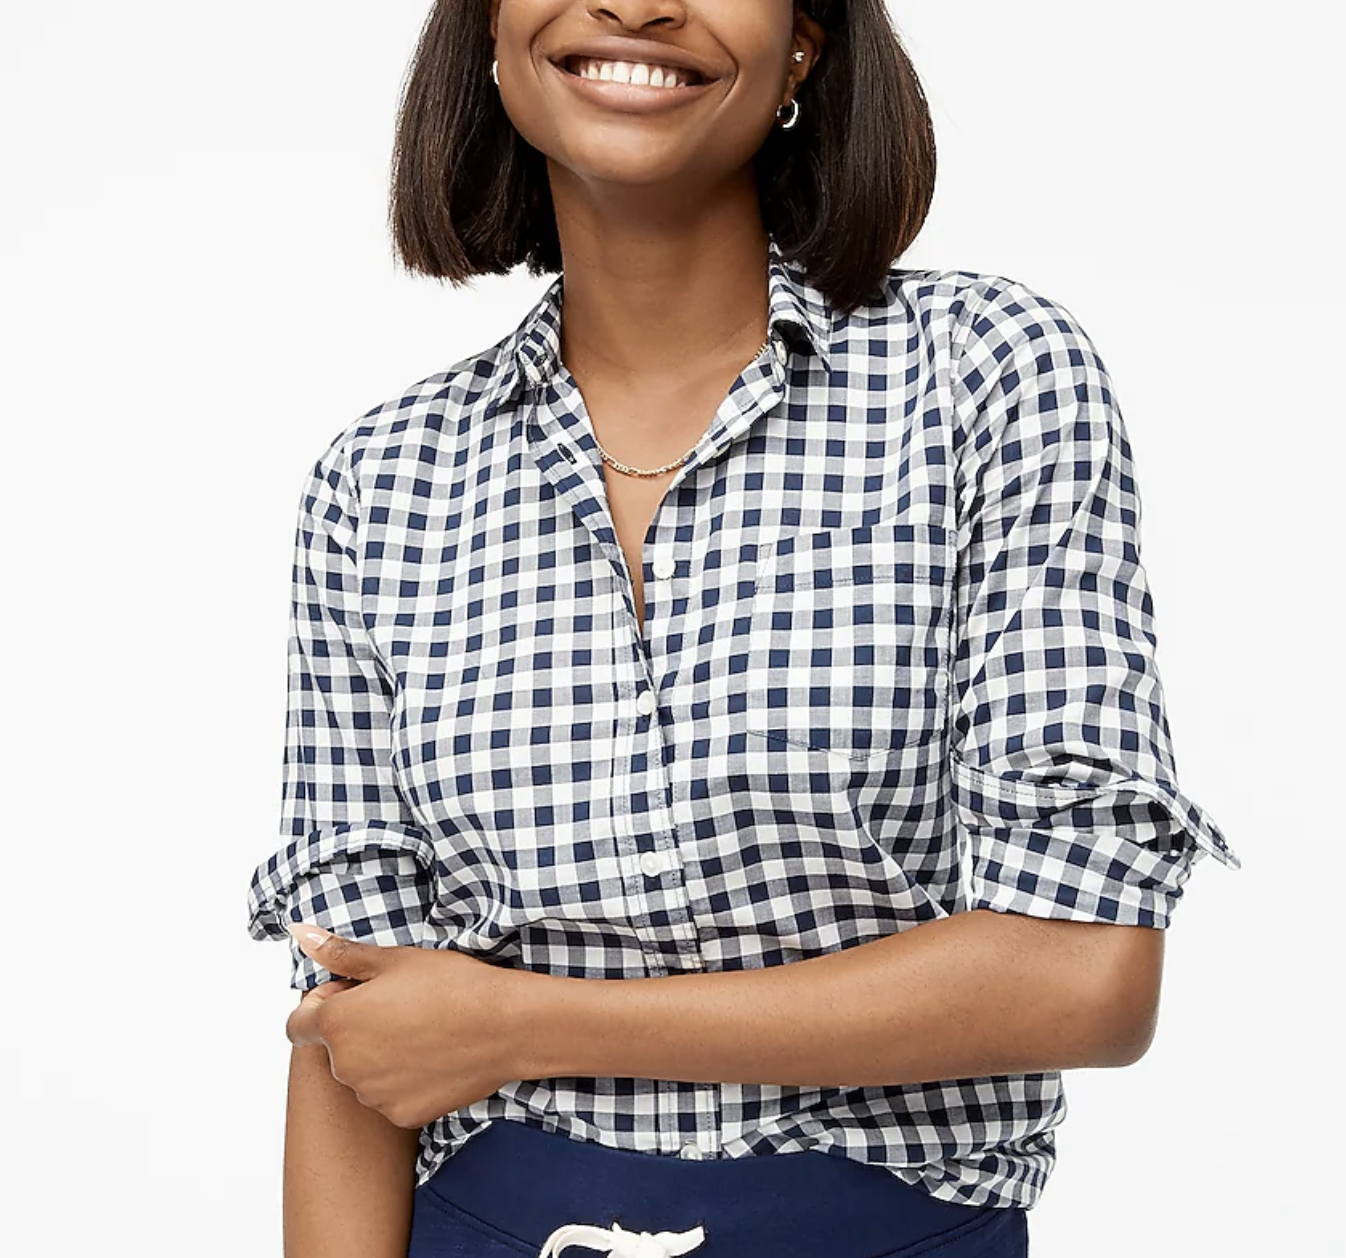 Model is wearing a black and white gingham print button down top